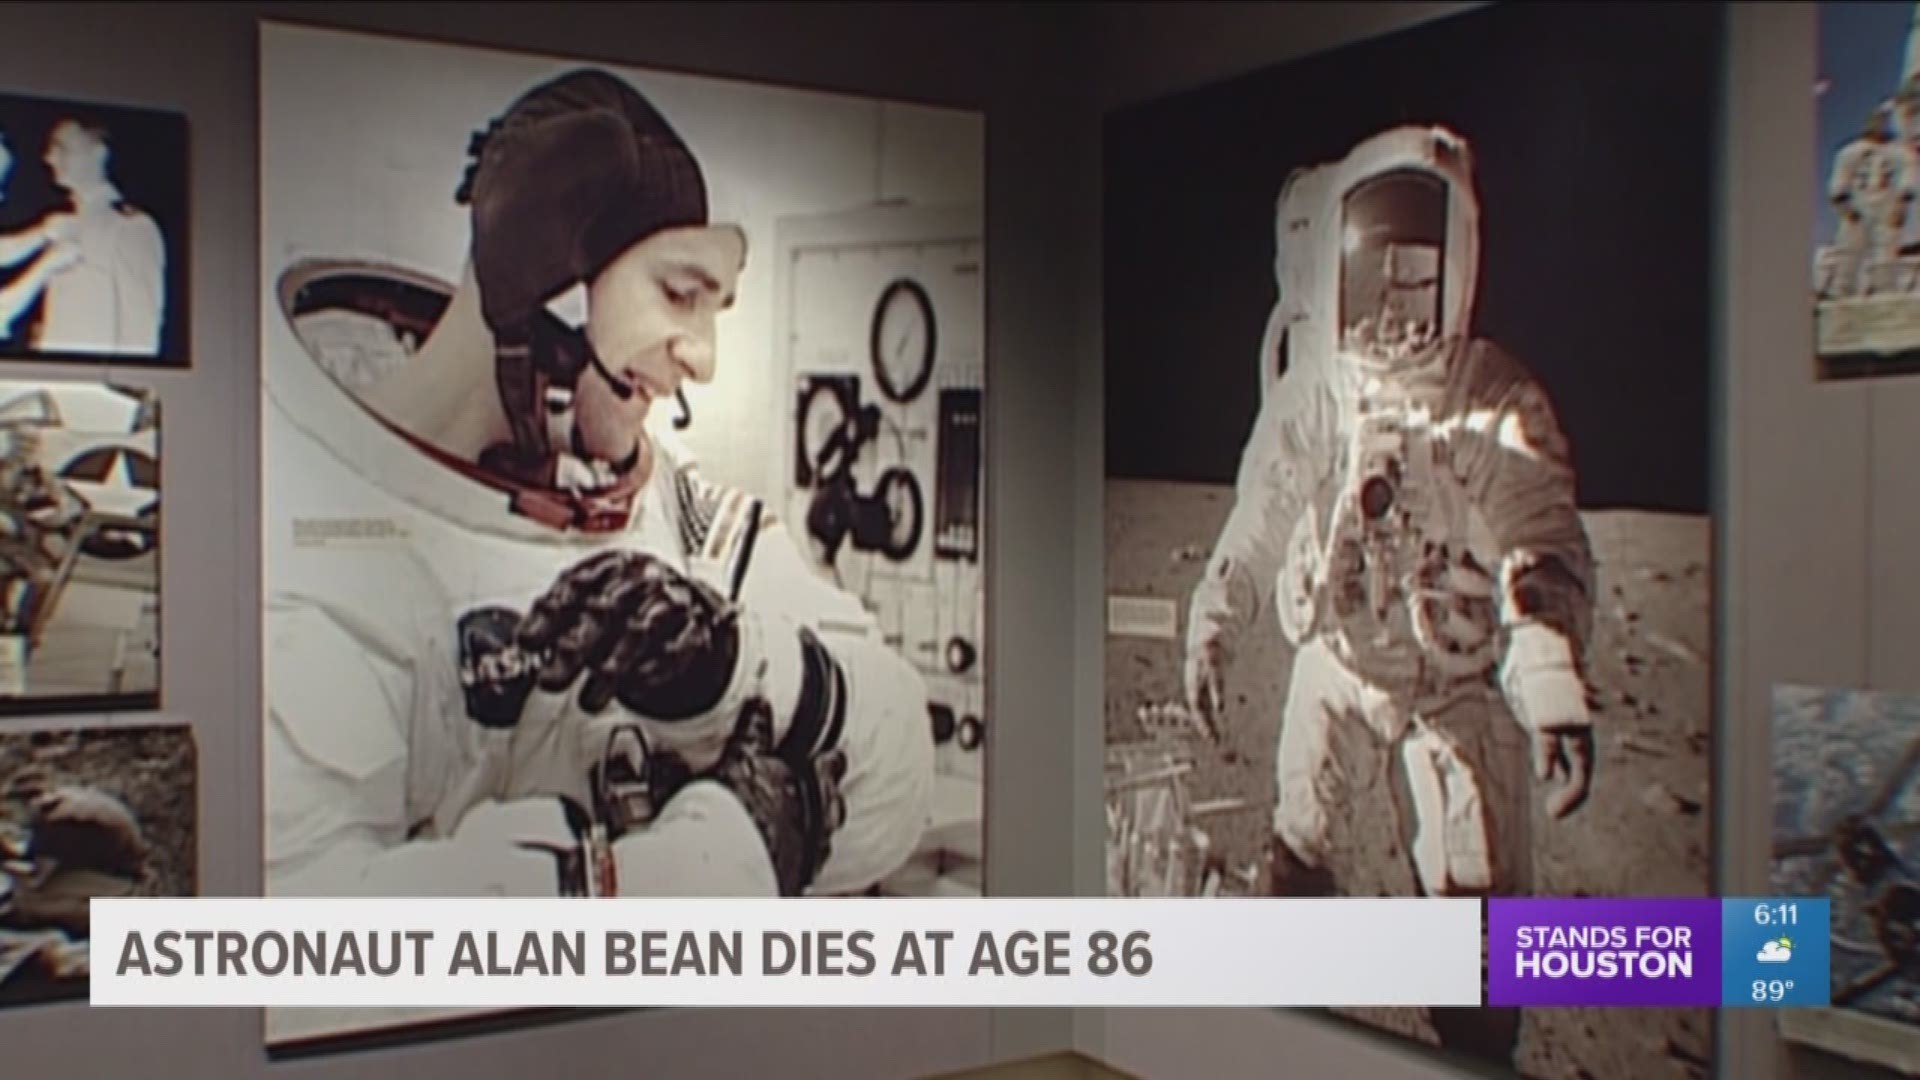 Alan Bean, 86, died on Saturday at Houston Methodist Hospital after he suddenly fell ill while traveling to Fort Wayne, Indiana two weeks before.